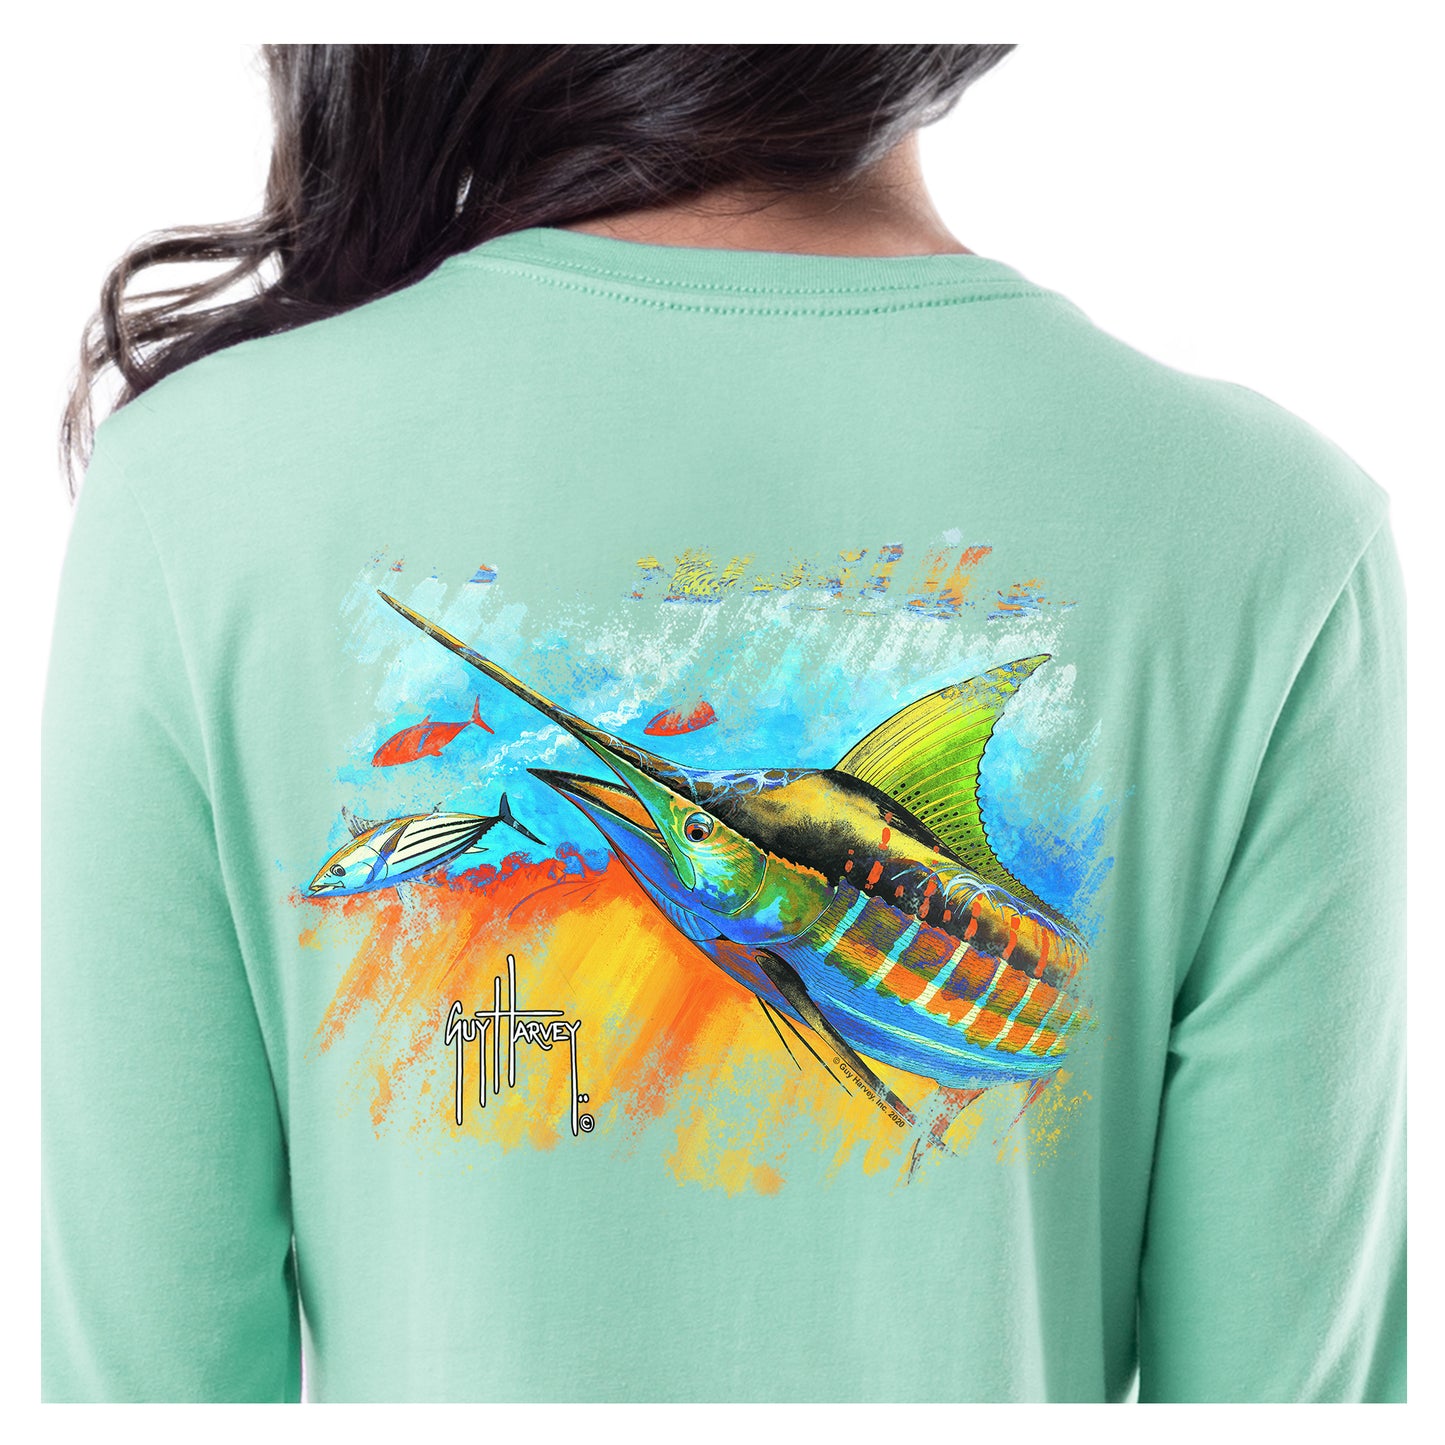 Ladies Fire & Ice Long Sleeve Crew Neck T-Shirt View 3